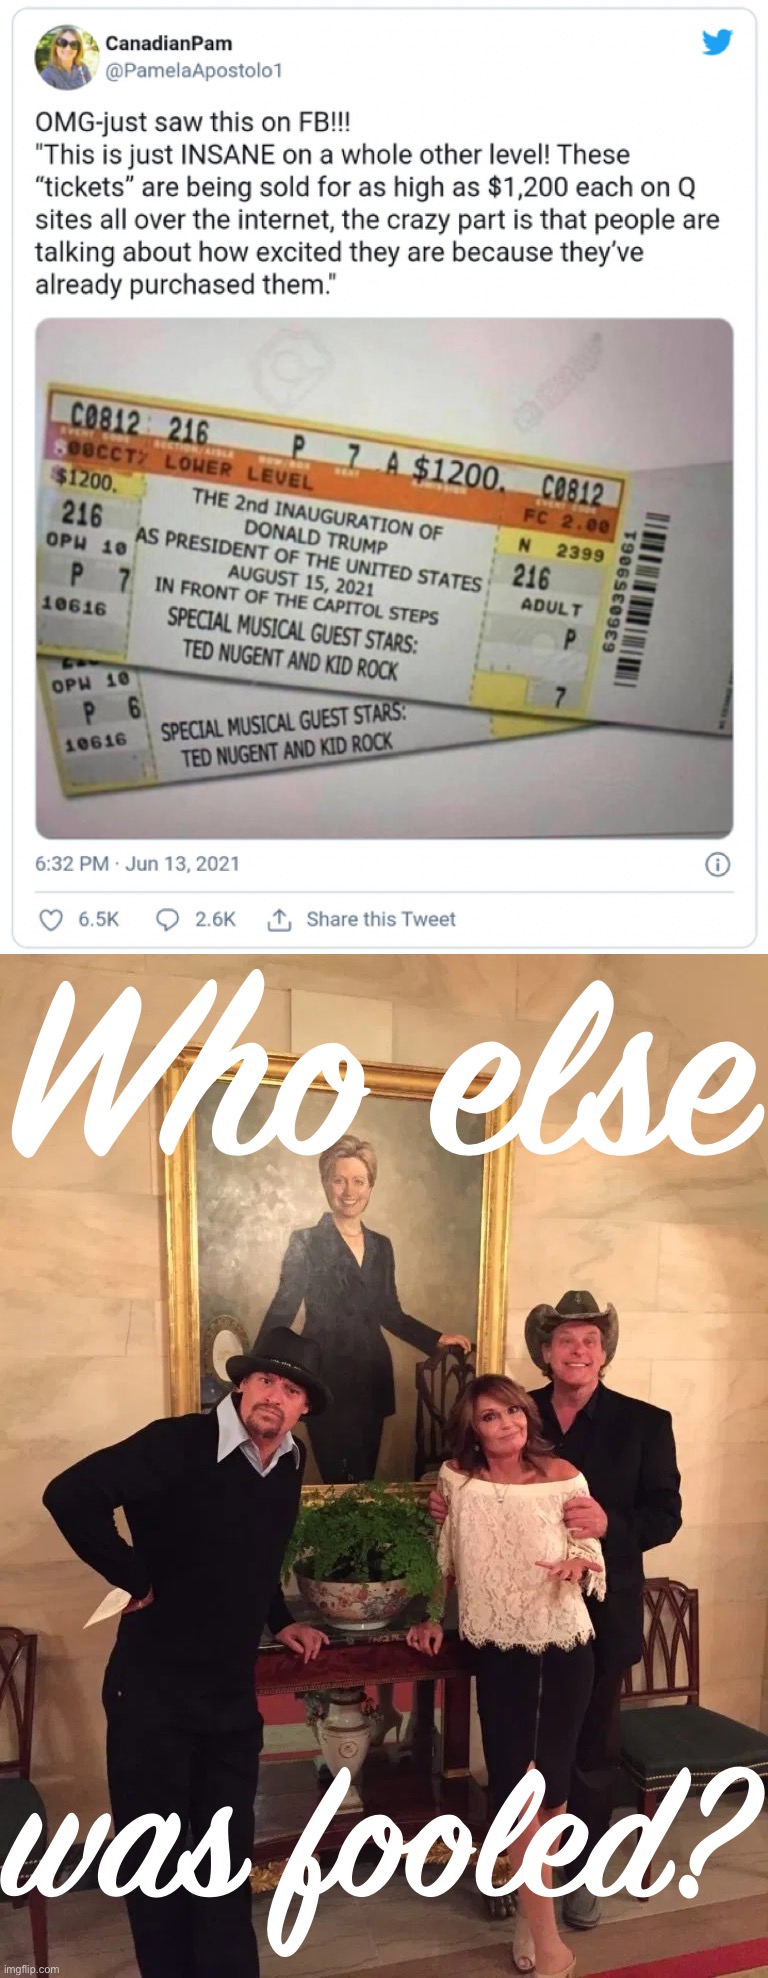 [Apparently this is not actually happening on Q sites. However: Nominated as most believable prank of the year] | Who else; was fooled? | image tagged in donald trump second inauguration,ted nugent kid rock sarah palin,kid rock,ted nugent,hoax,made you look | made w/ Imgflip meme maker